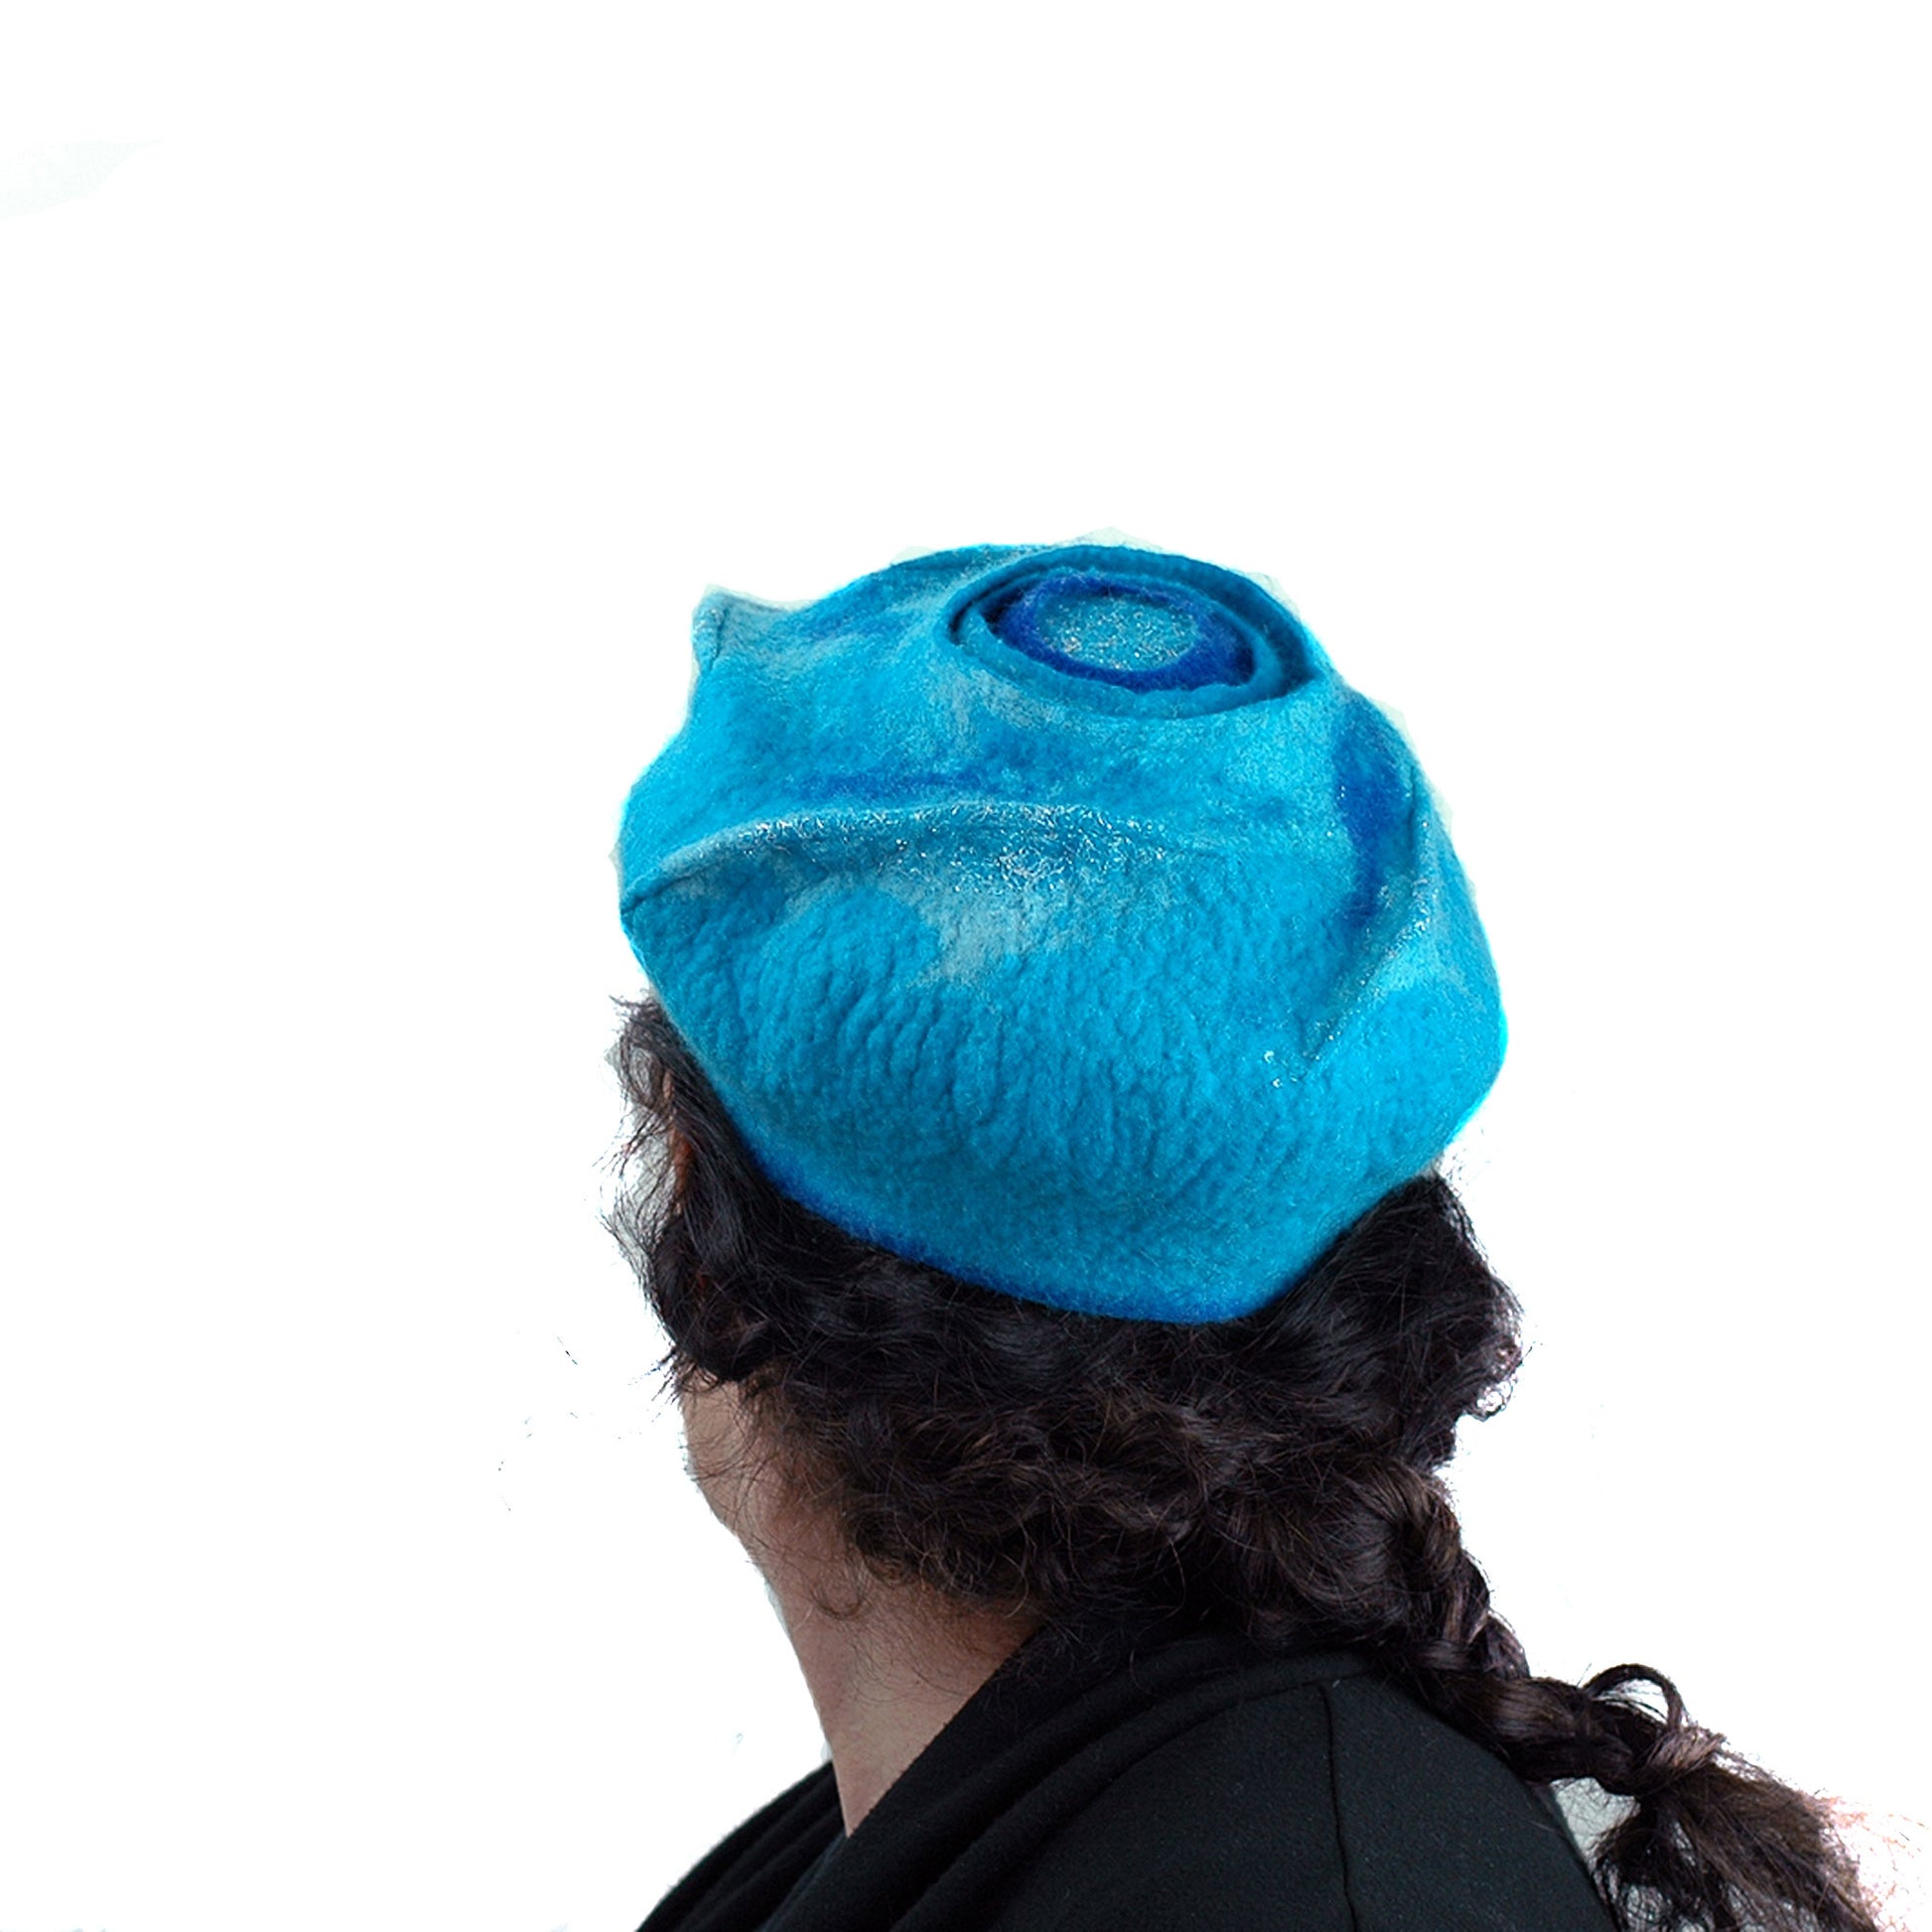 Turquoise Blue Beret with Concentric Circles / Fibonacci Rose on Top - back view